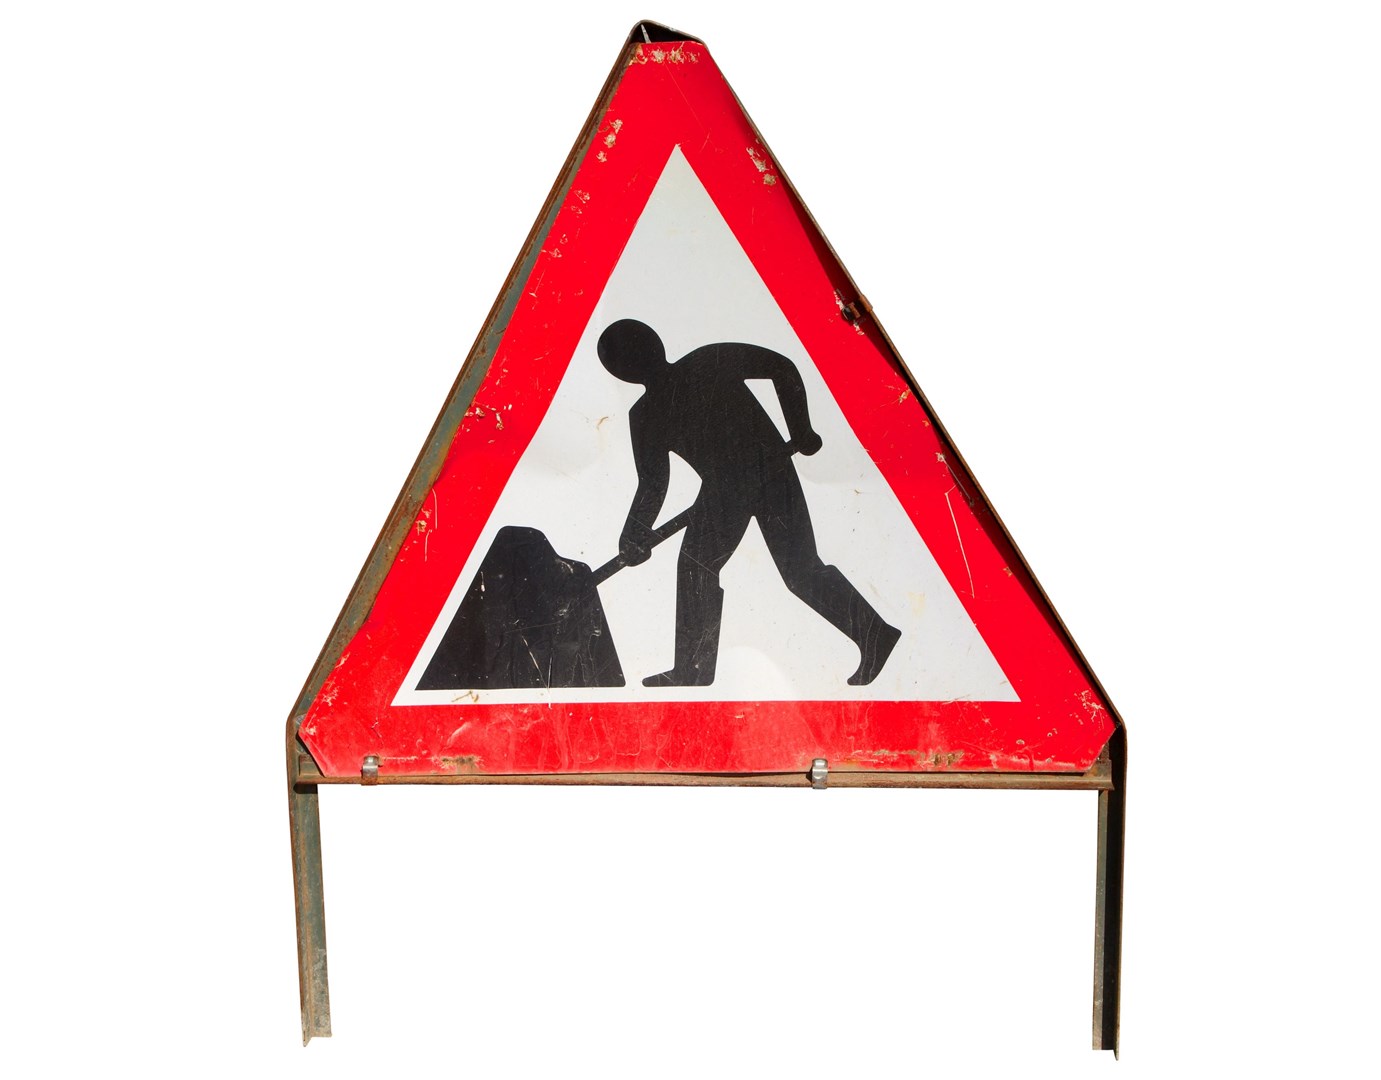 Road works are taking place on the A95 at Cromdale.